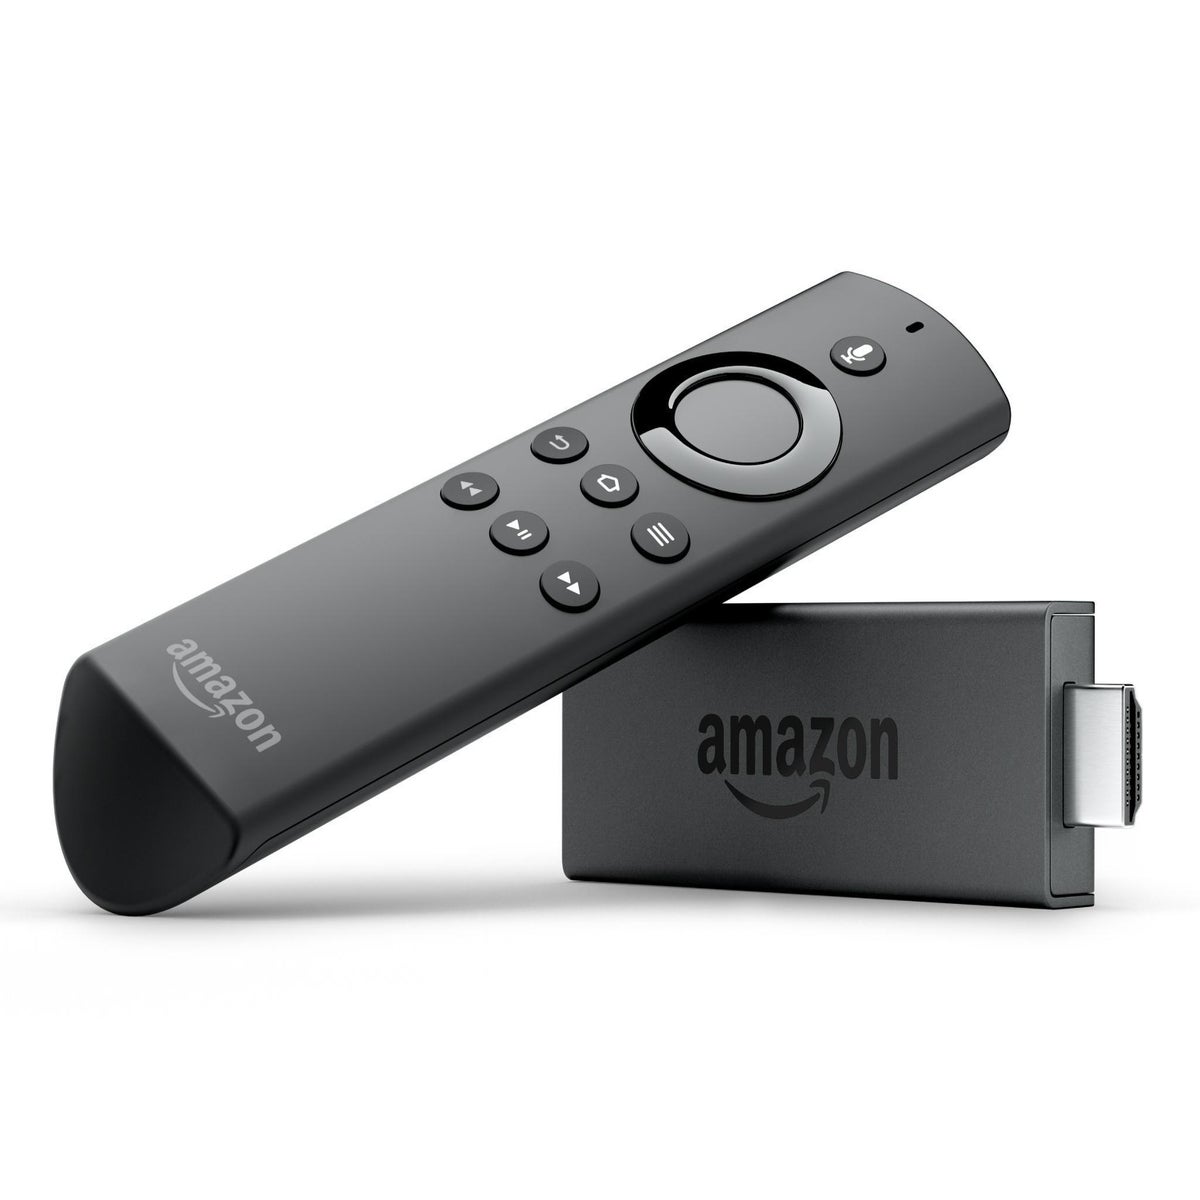 announces new Fire TV Sticks with enhanced features